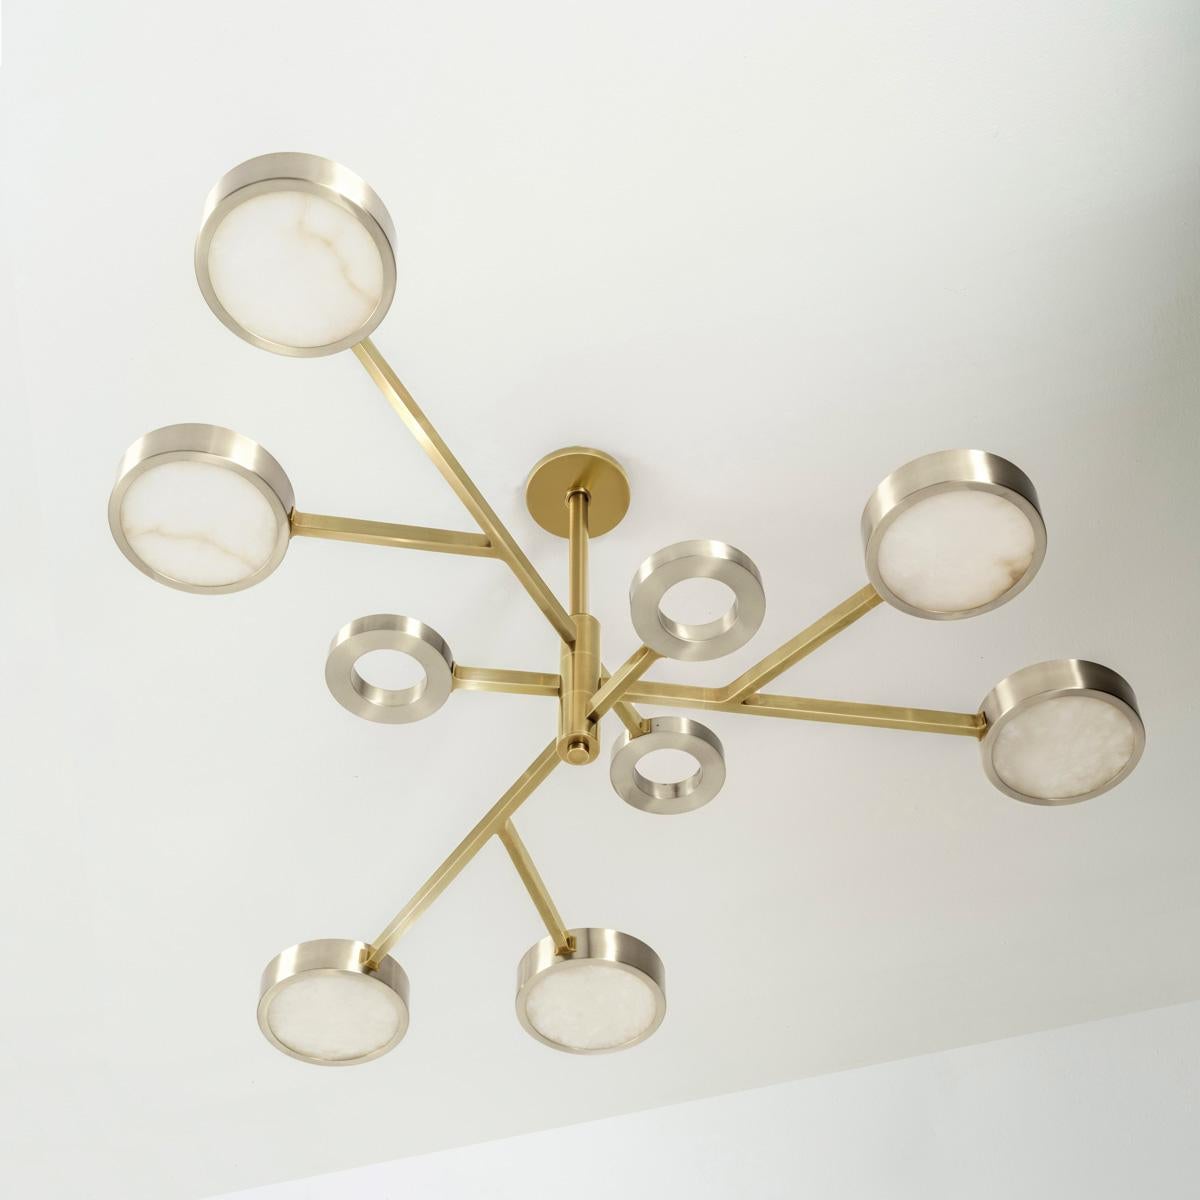 The Volterra ceiling light is an ode to the historic Tuscan city by the same name known for its striking architecture and its precious stone quarries. The fixture exemplifies these qualities with its sculptural counter-balance design, cast brass